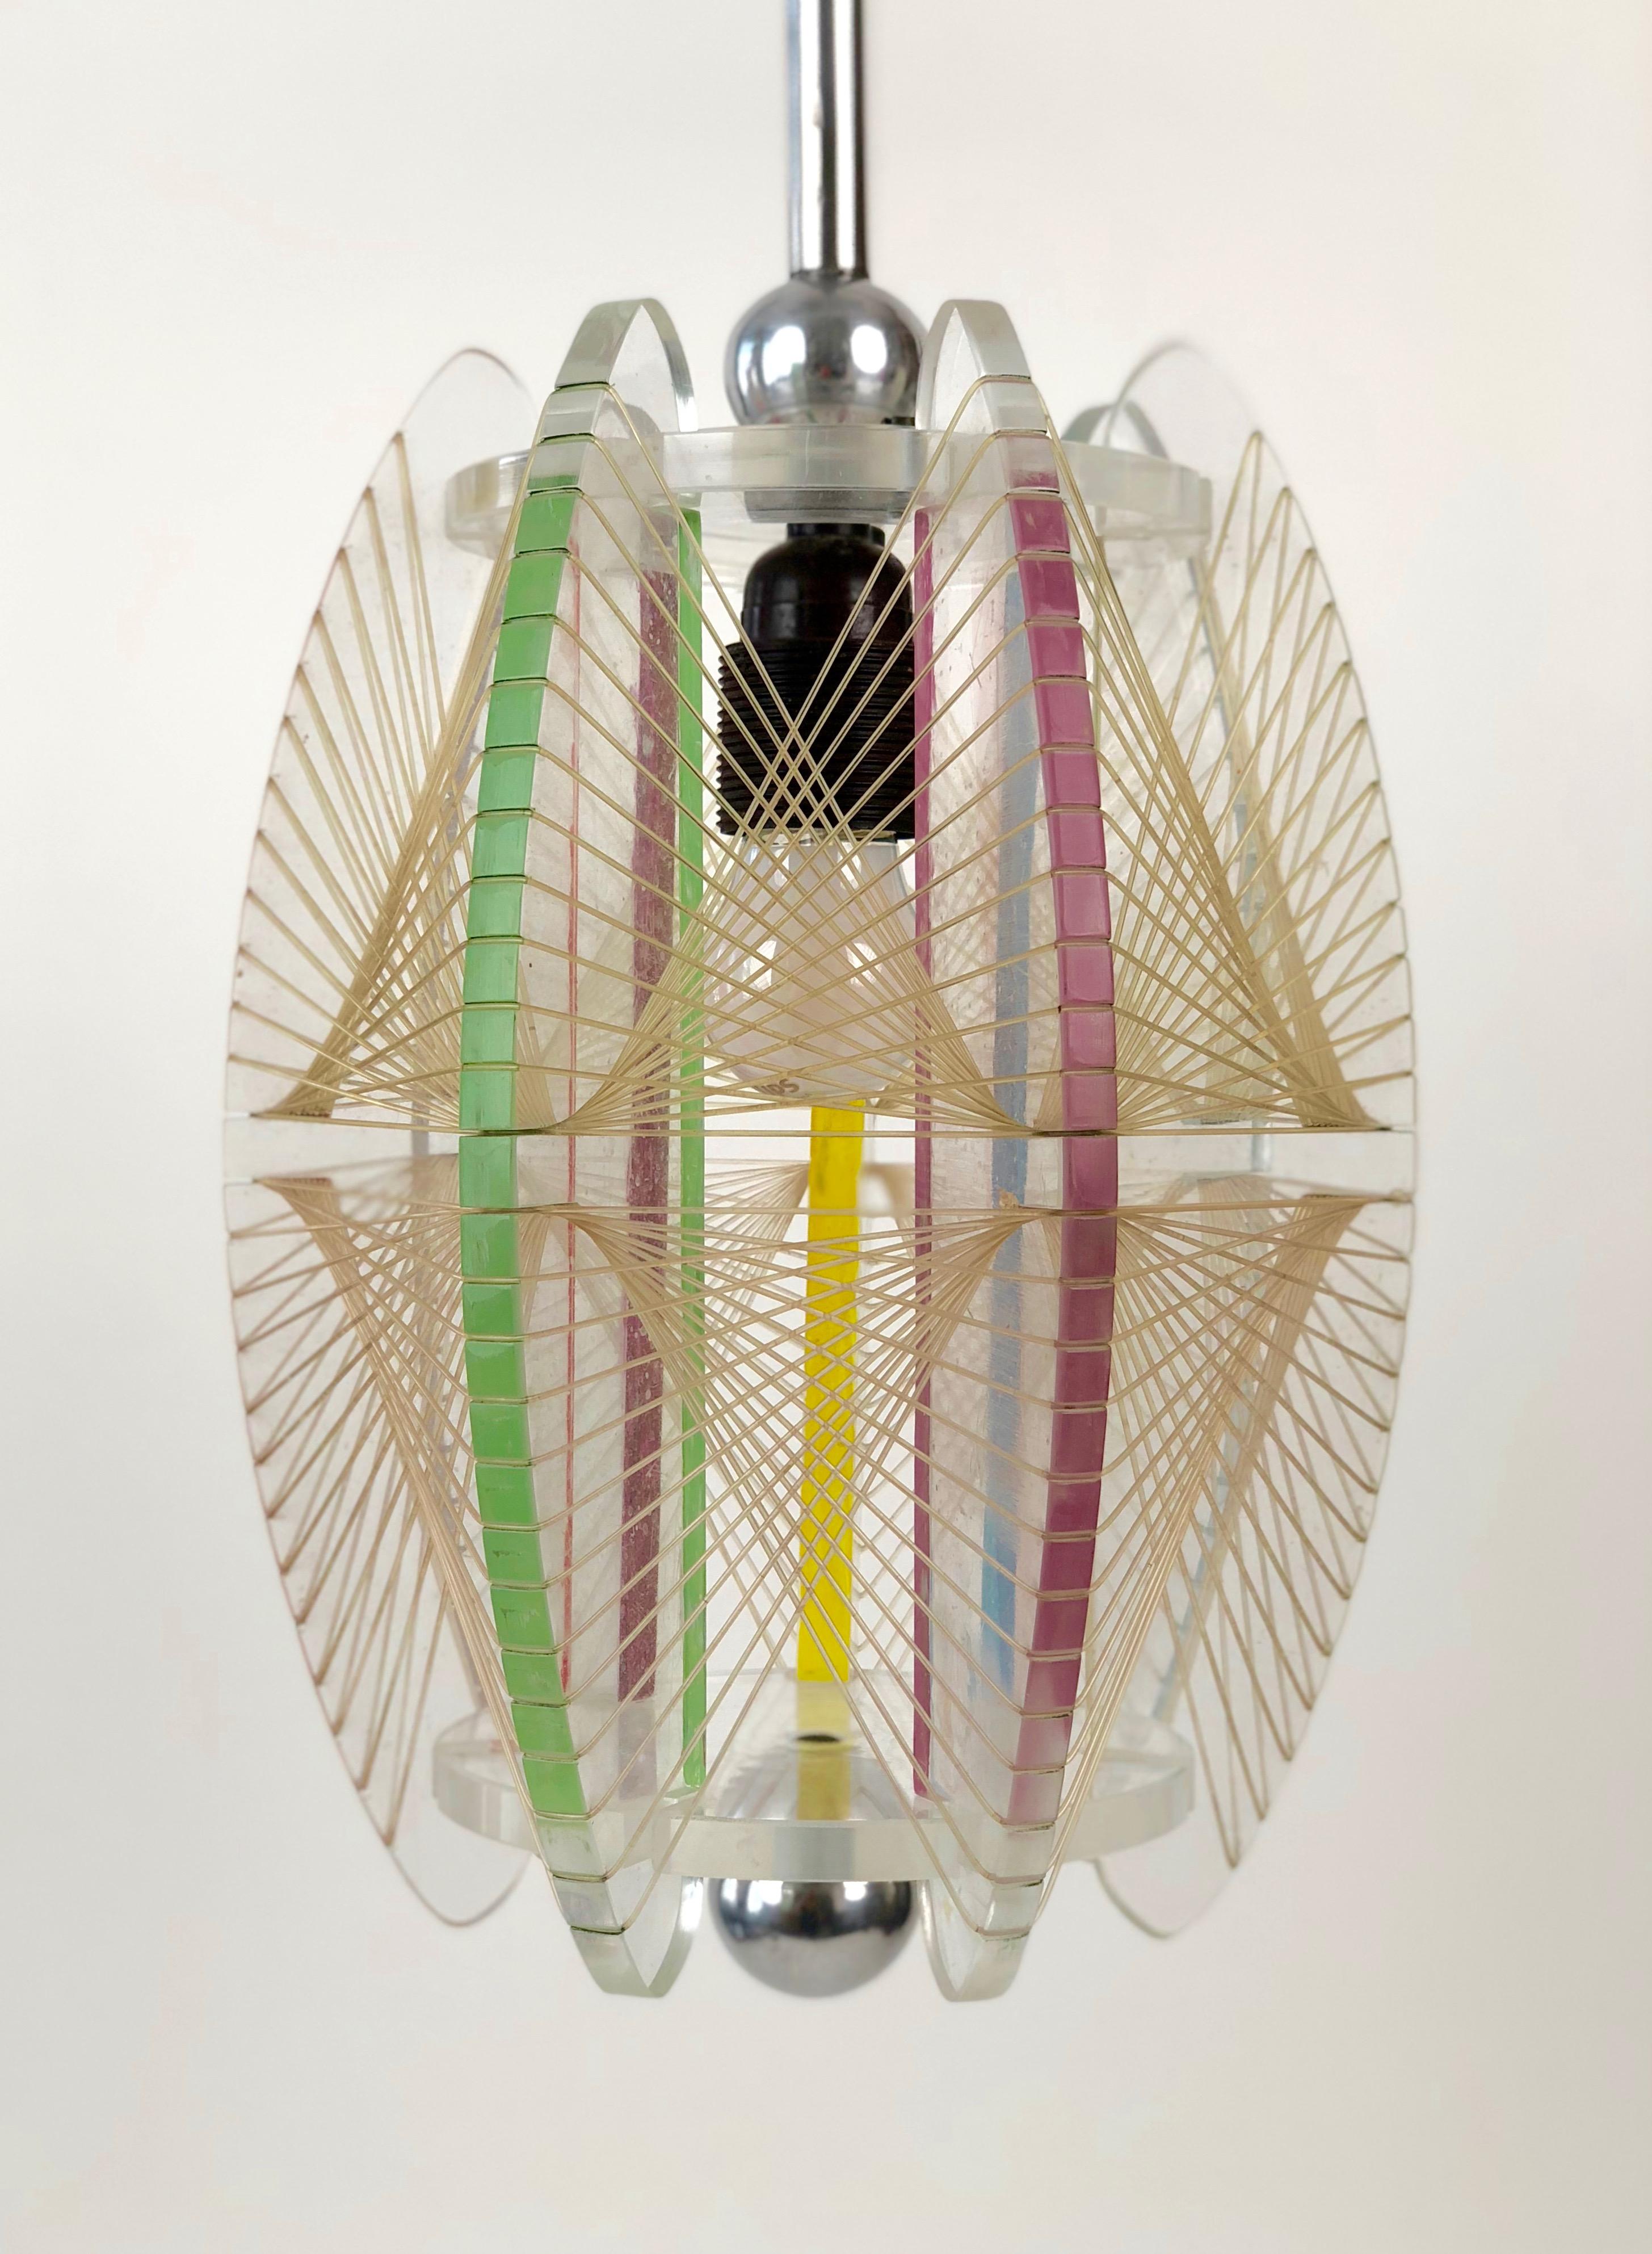 20th Century Midcentury Acrylic and Mono Filament Pendant with Color Accents, Czech Republic For Sale